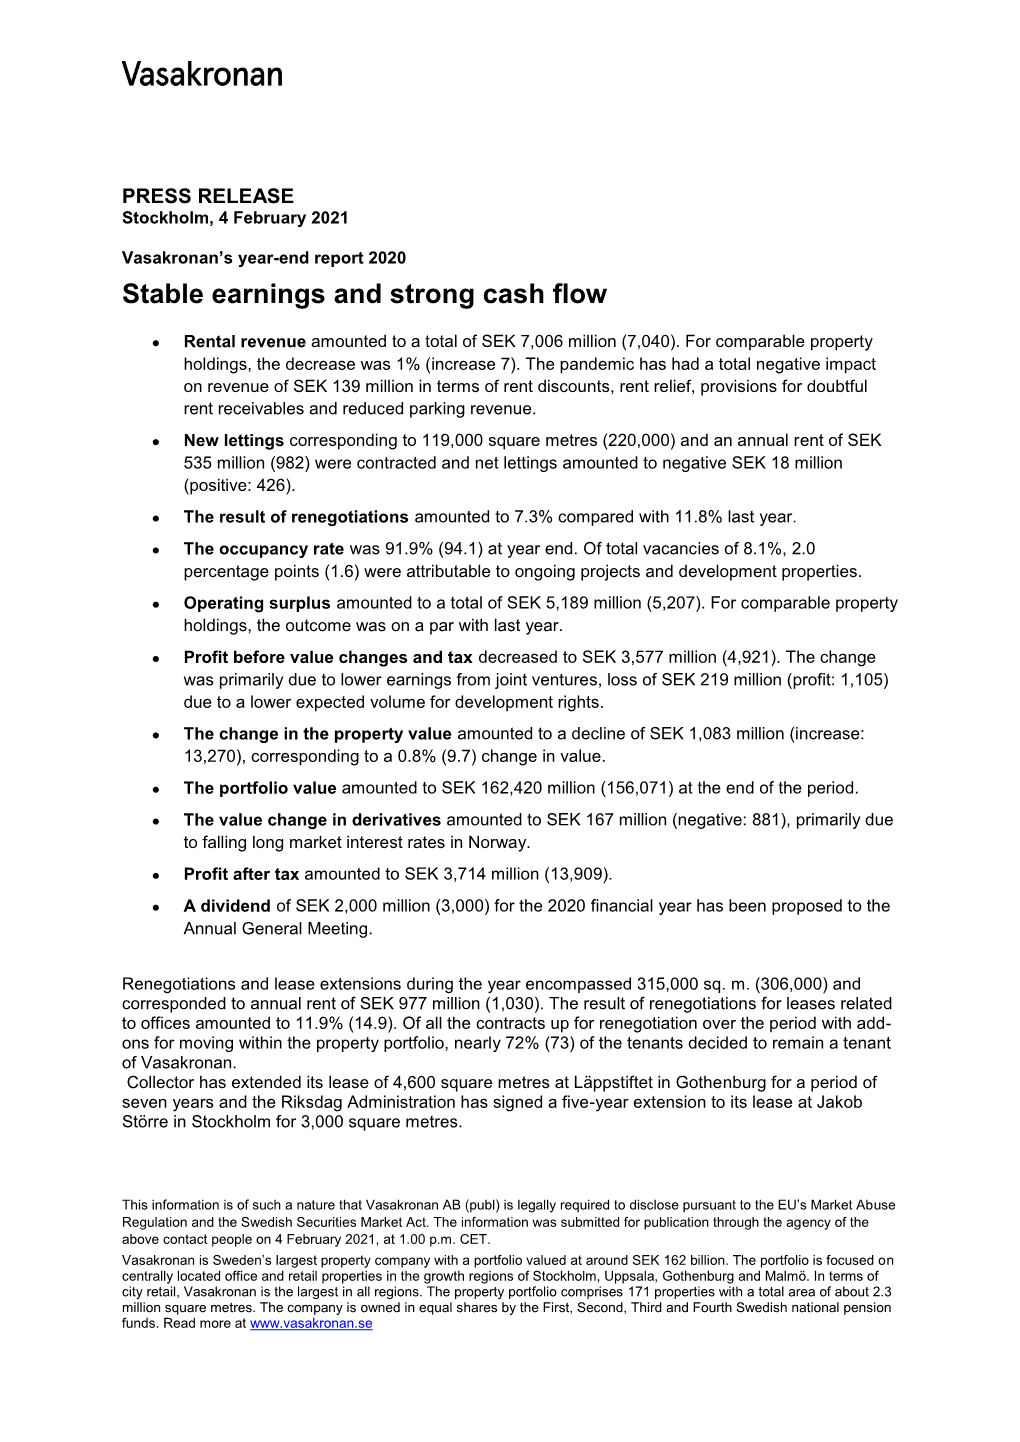 Stable Earnings and Strong Cash Flow